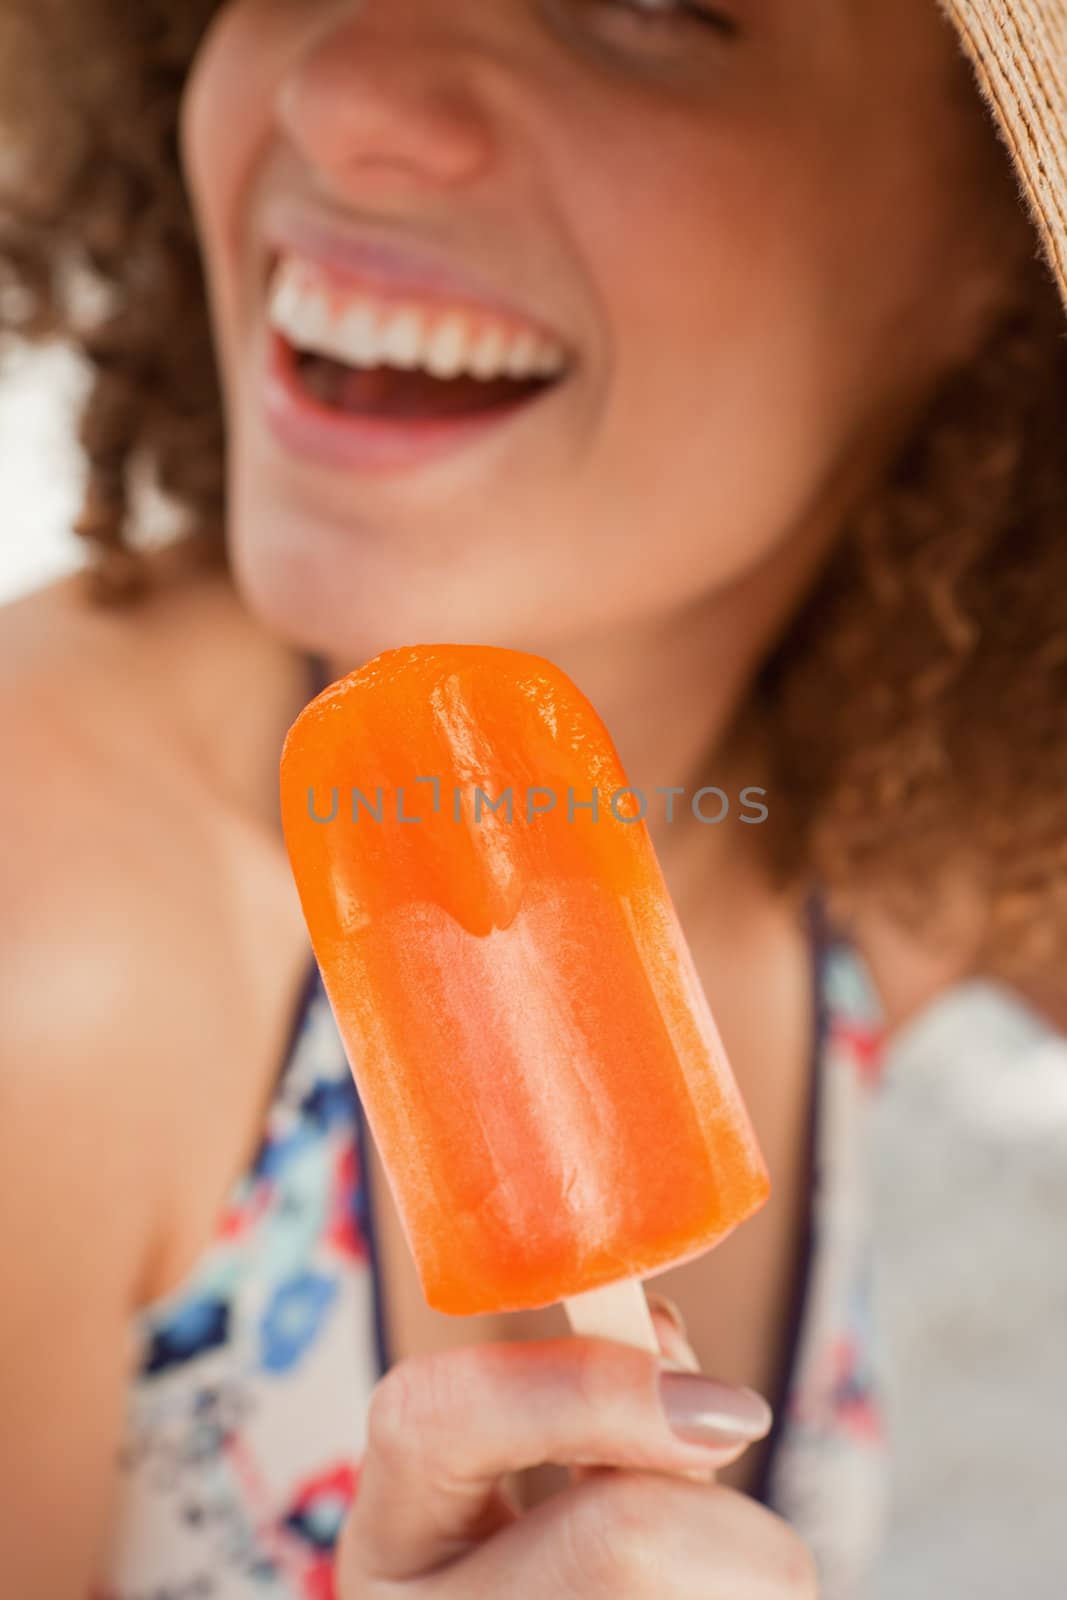 Orange popsicle held by a smiling young woman by Wavebreakmedia